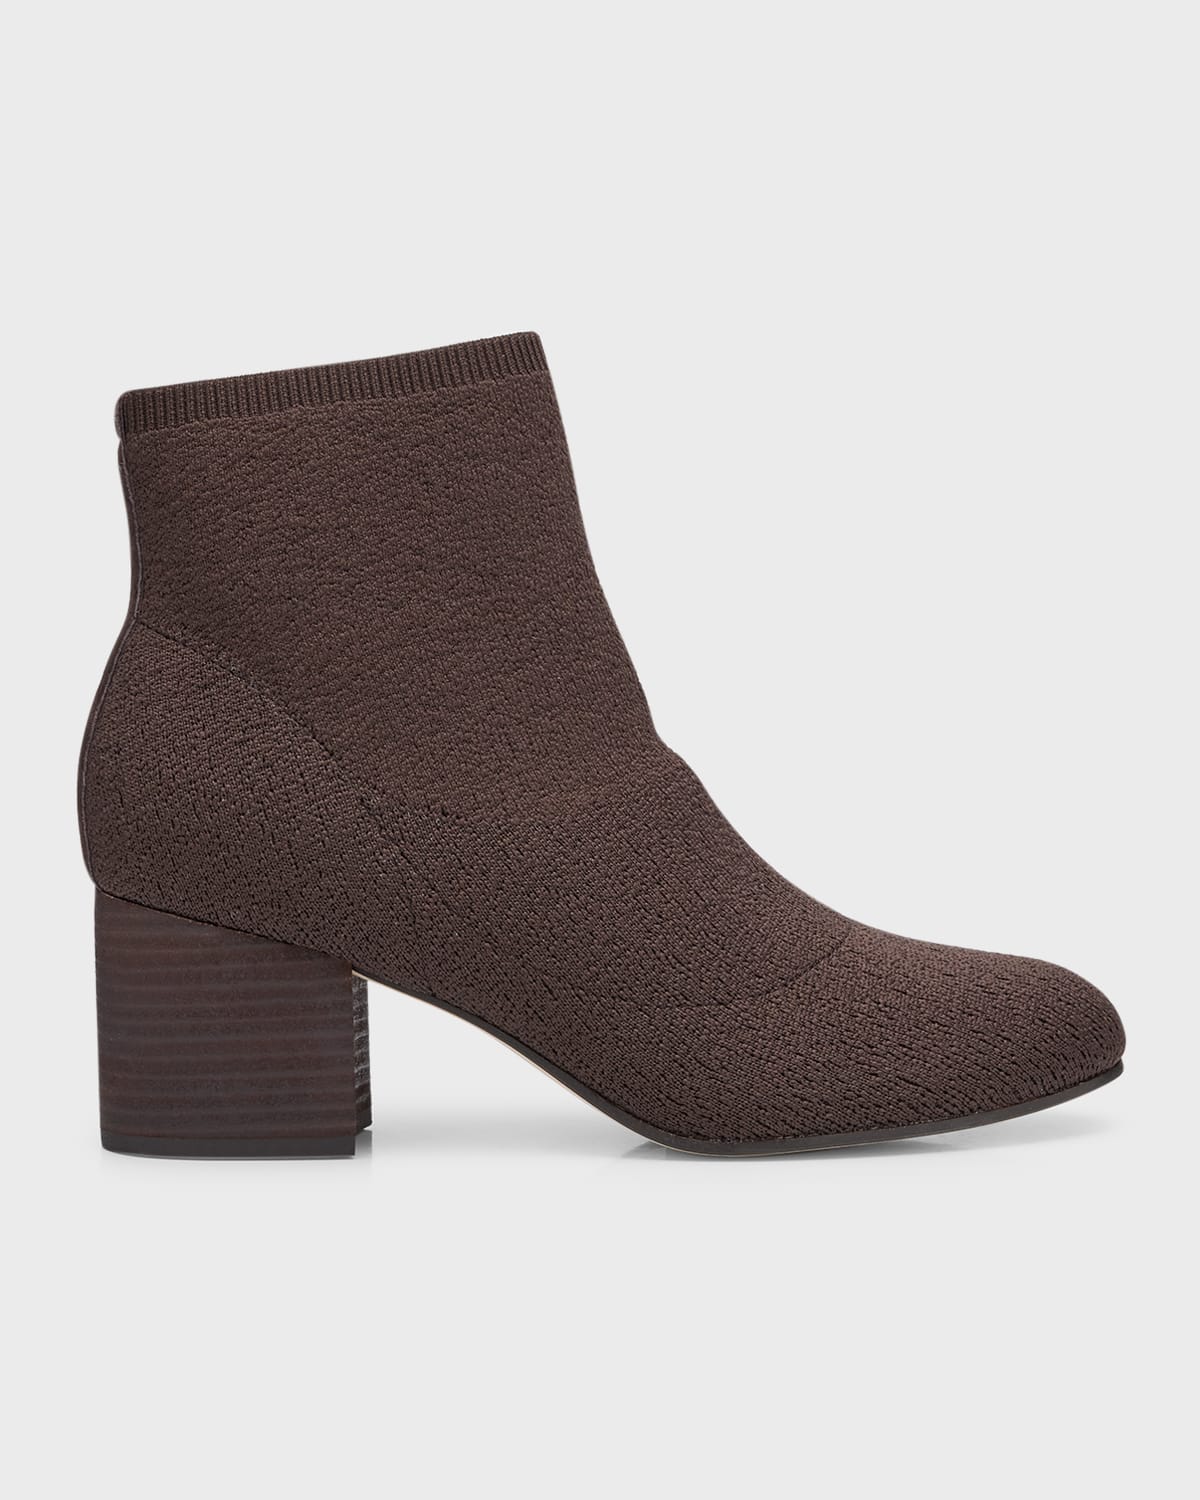 EILEEN FISHER ORIEL STRETCH KNIT ANKLE BOOTS